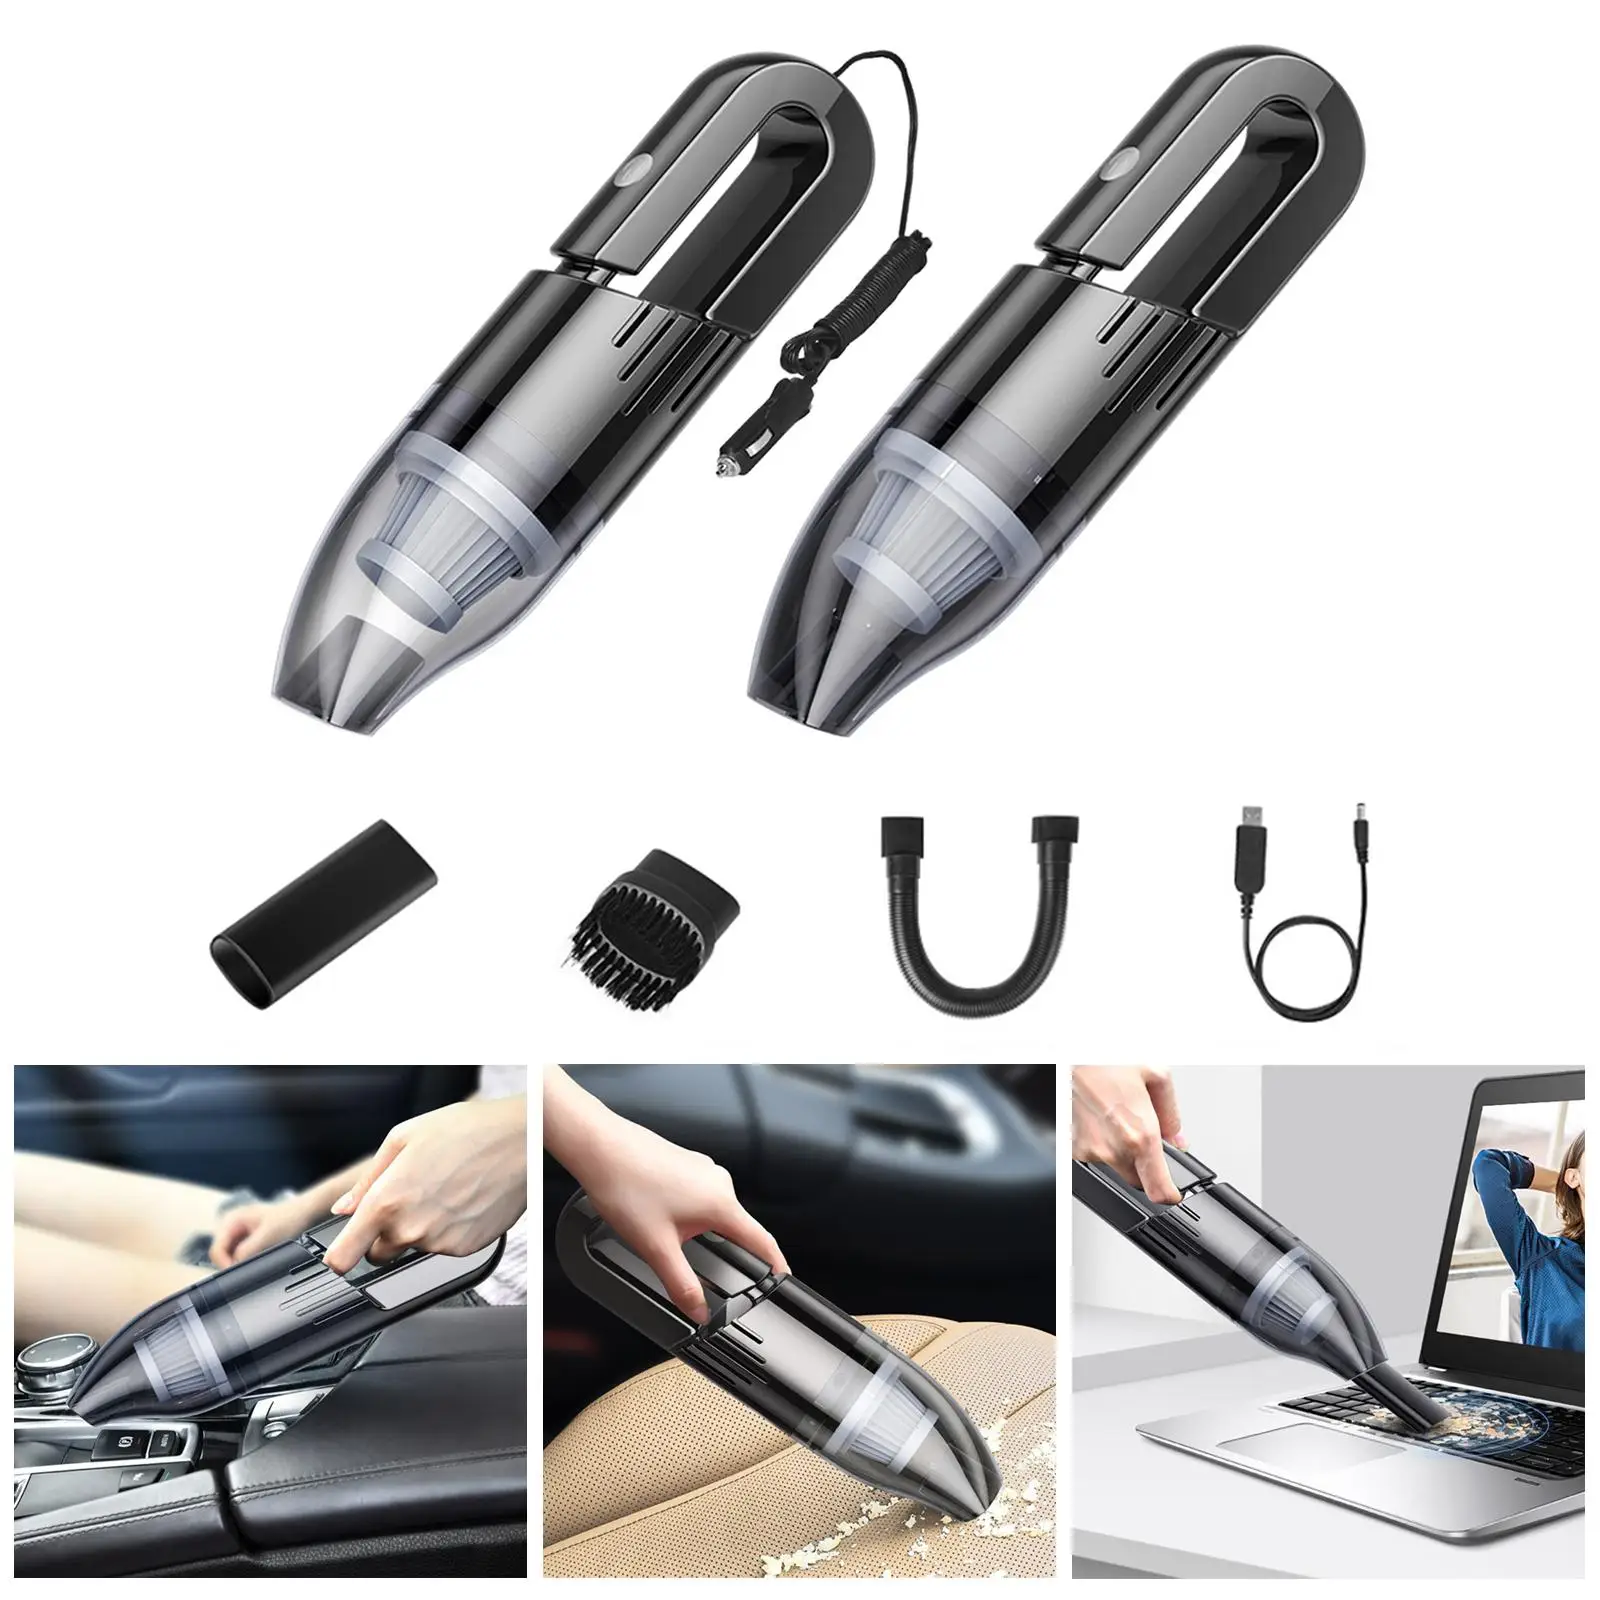 Portable Car Vacuum Cleaner High Power 120W for Car Sofa Pet Hair Cleaning Keyboard